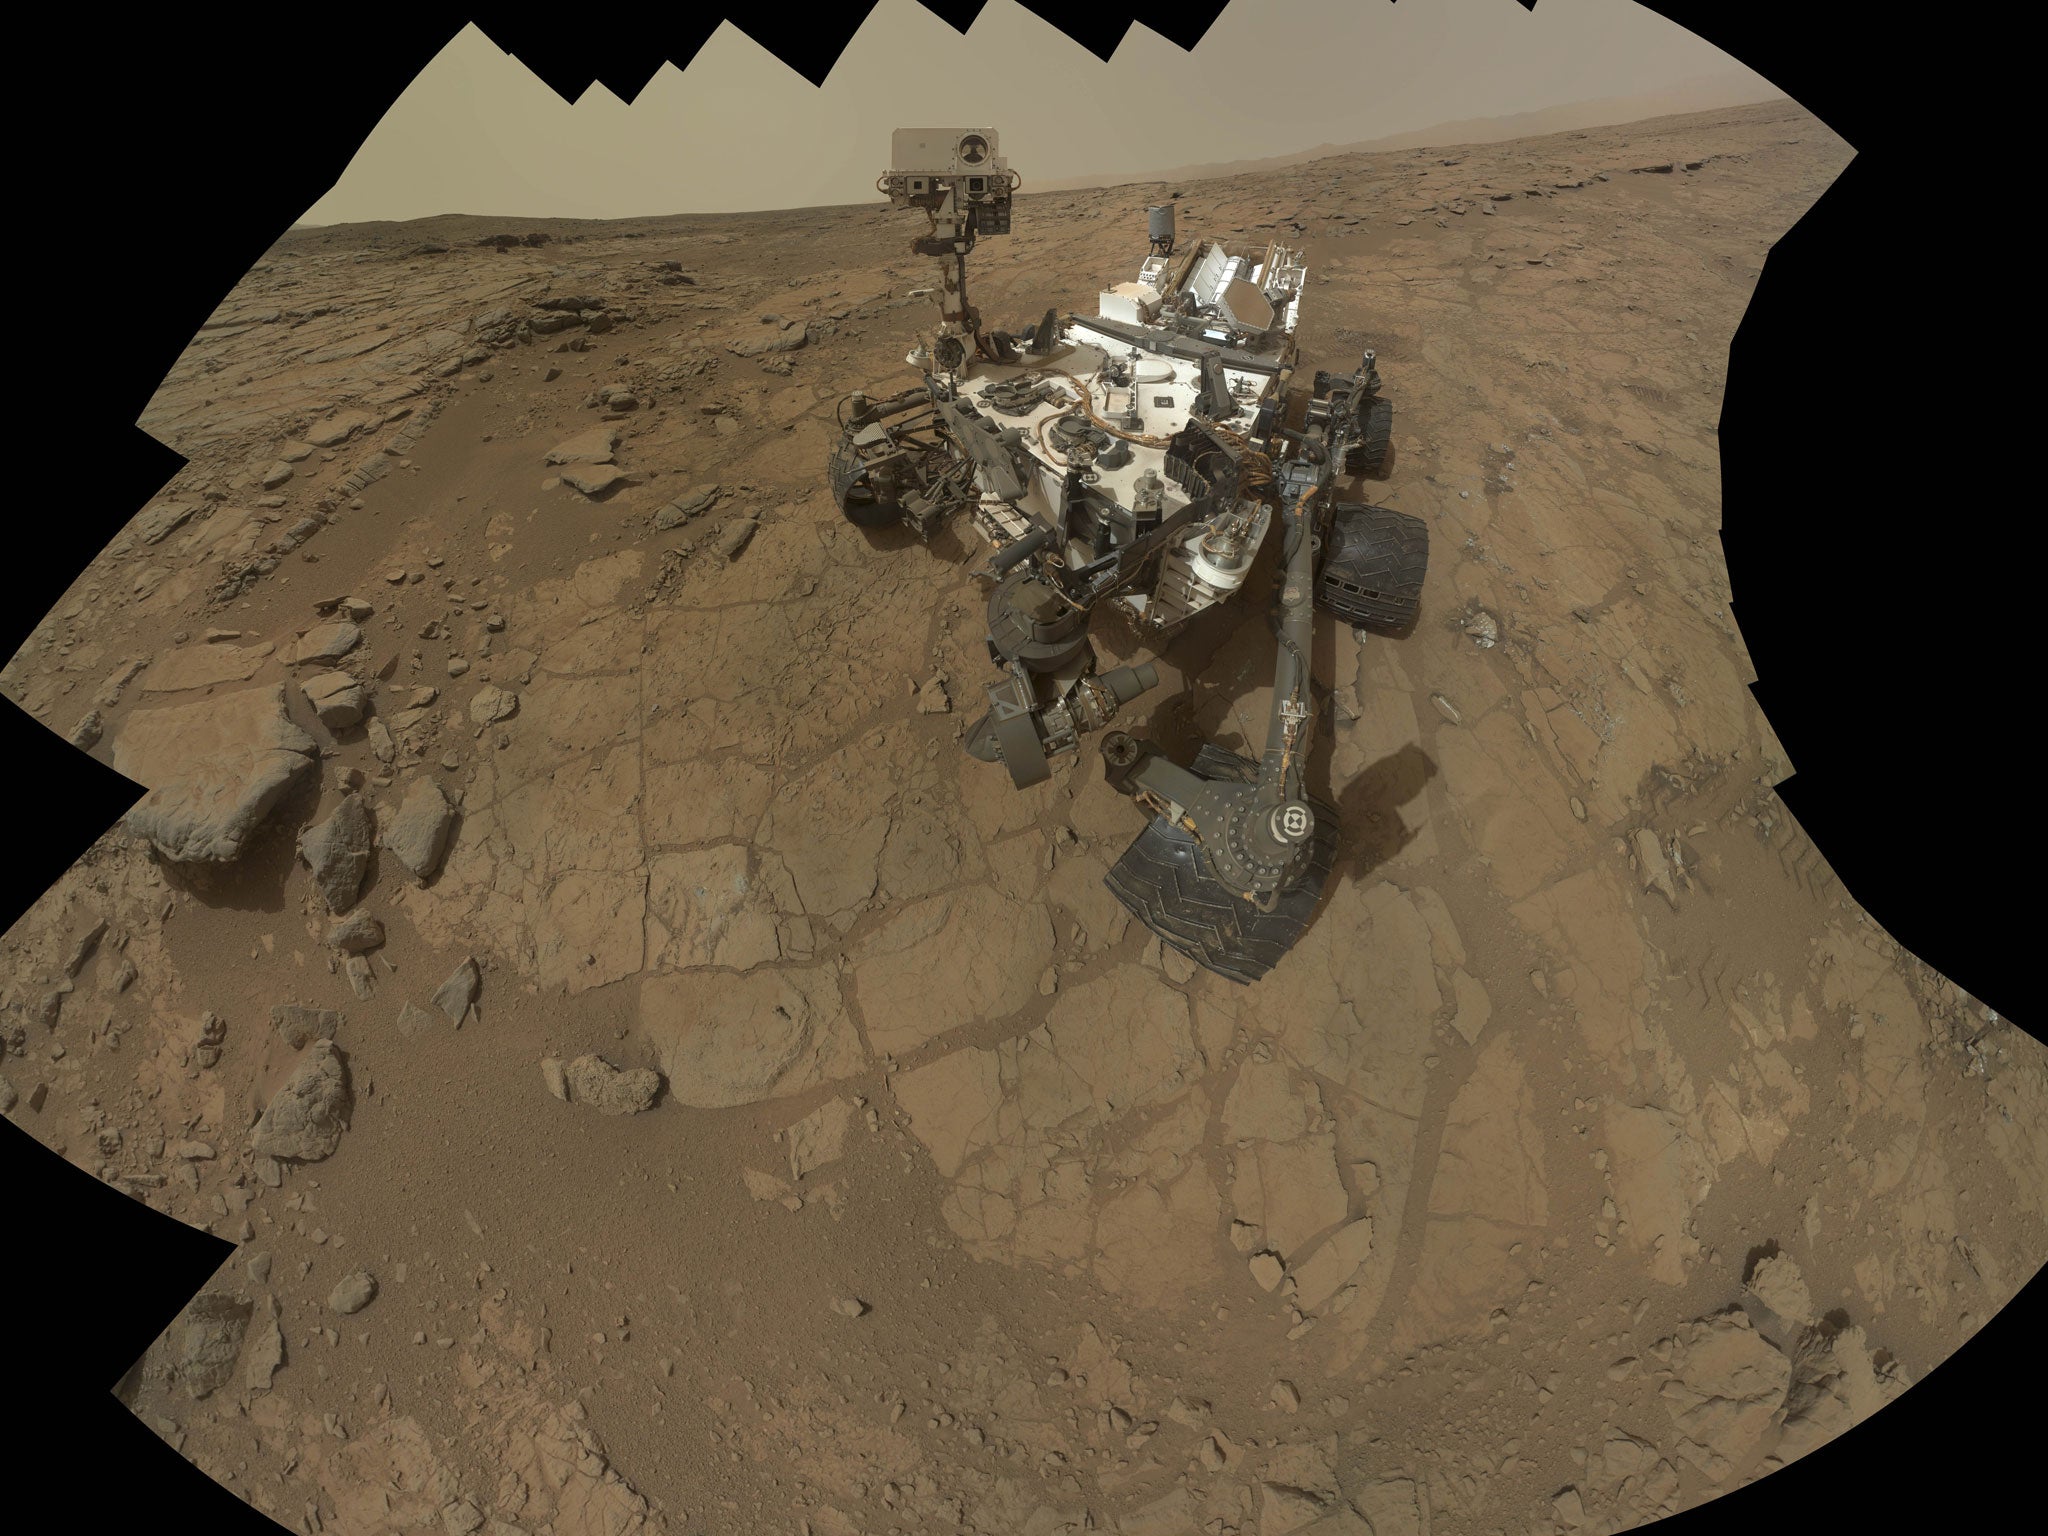 Studies carried out by Nasa's Curiosity Rover have for the first time revealed the existence of a type of sedimentary rock known as mudstone which is likely to have been created by a large body of standing water that had existed for at least many thousand